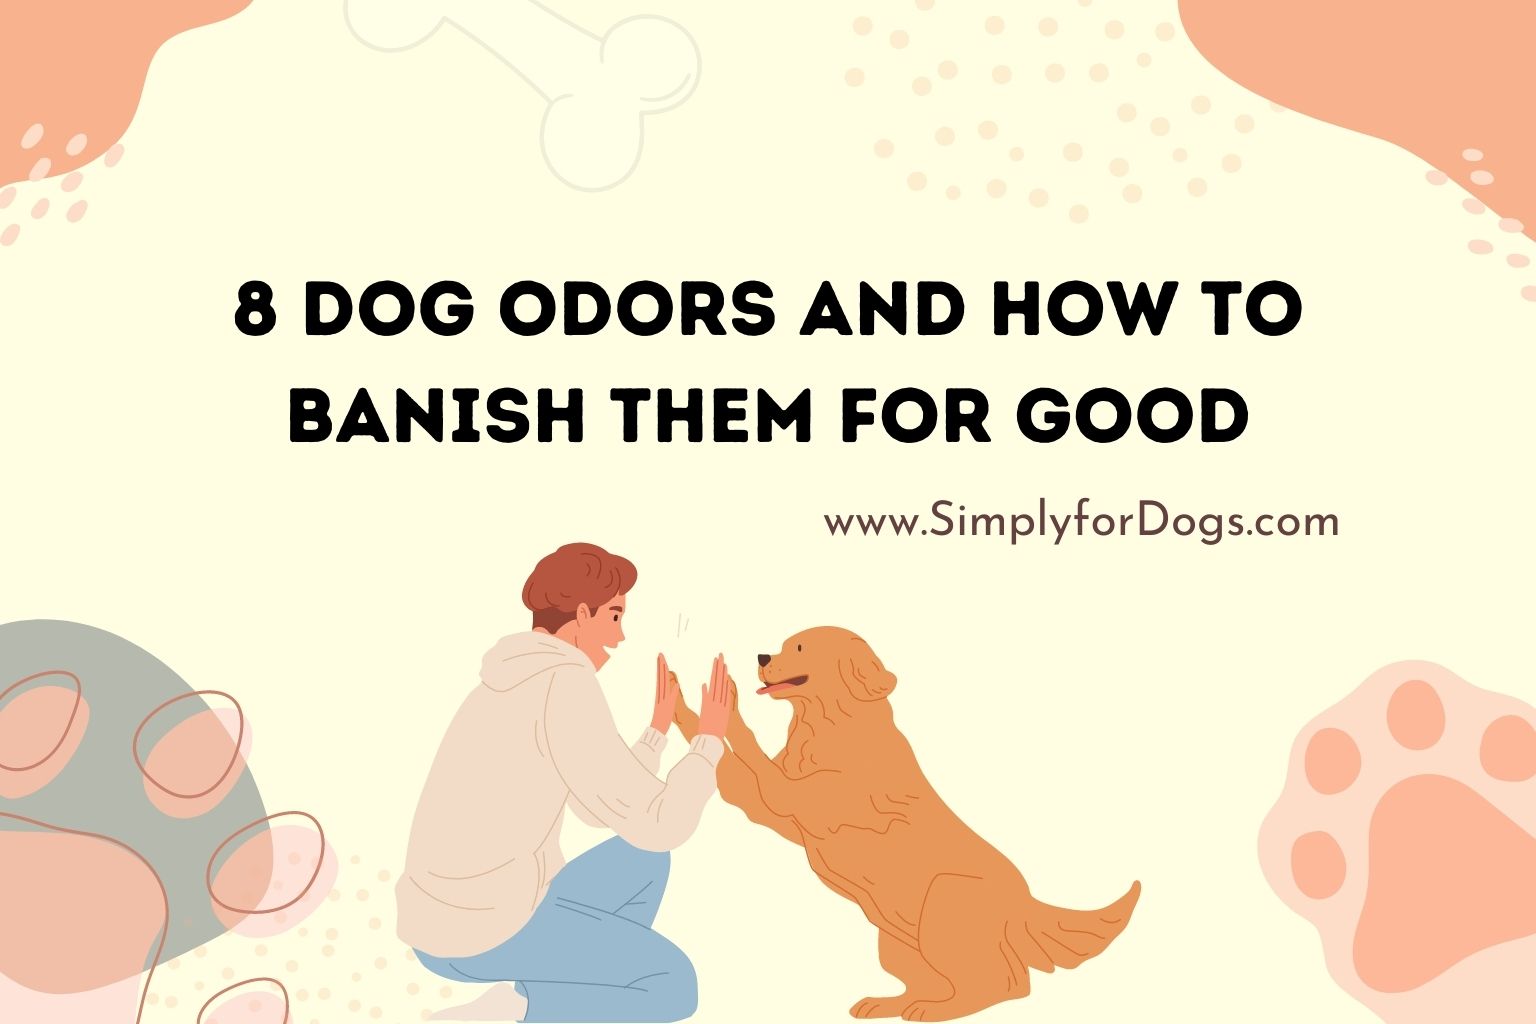 8 Dog Odors and How to Banish Them for Good